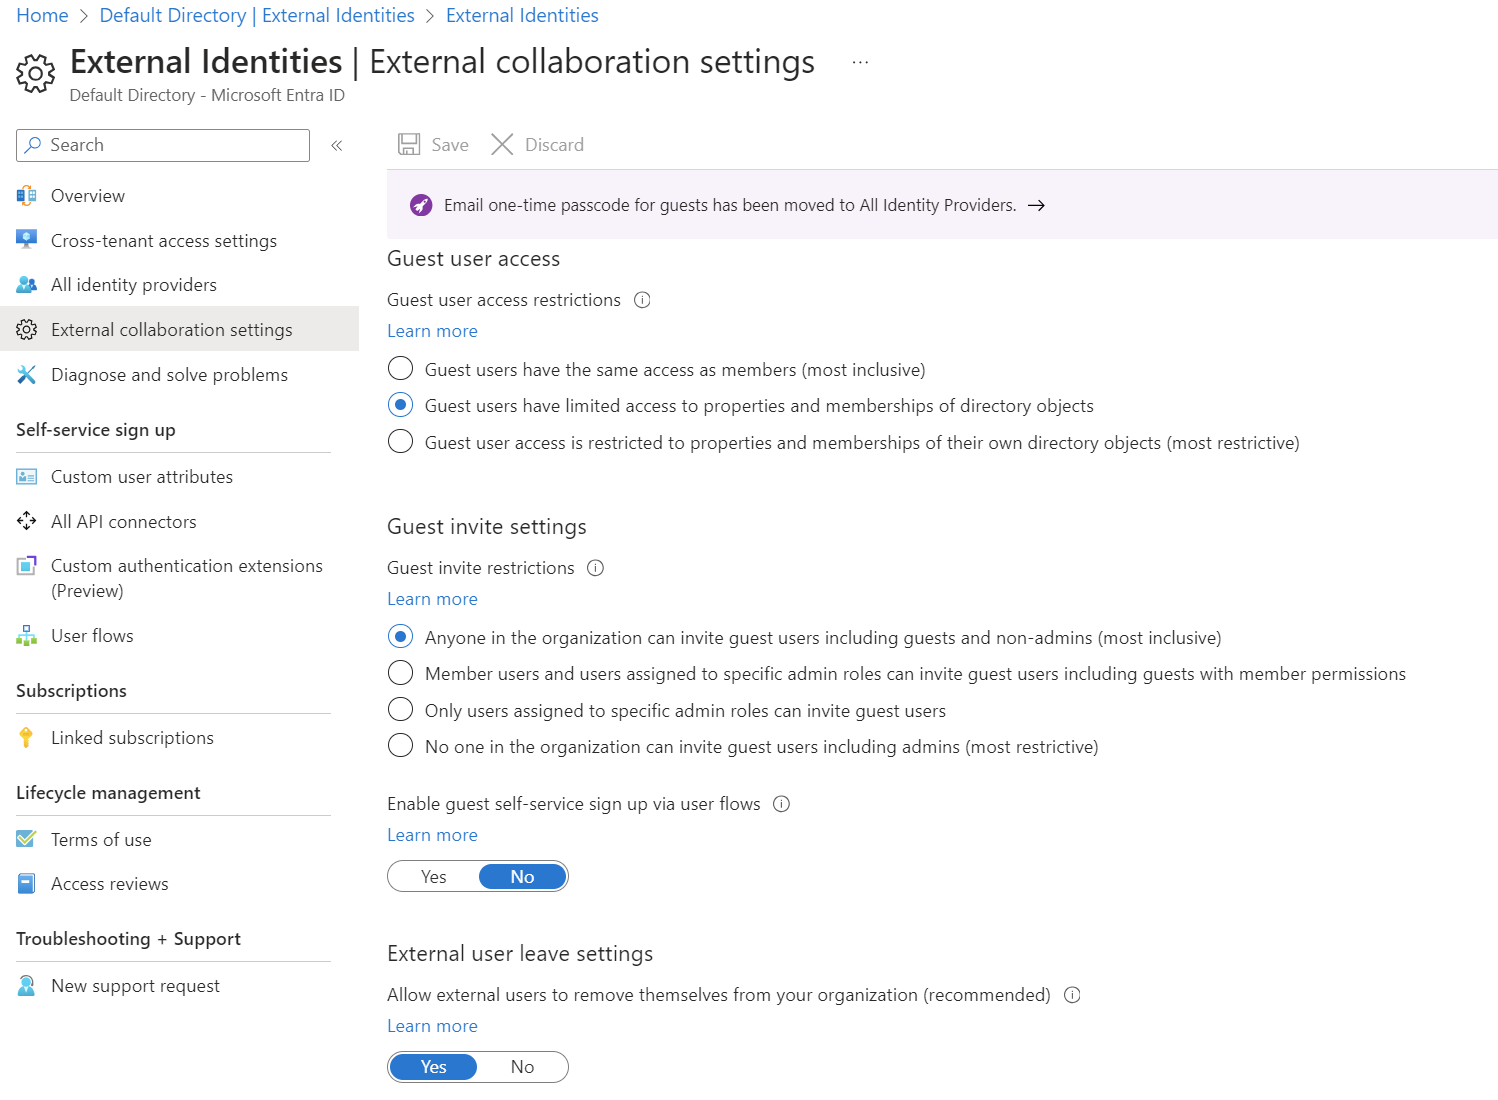 Screenshot showing the External collaboration settings in Microsoft Entra ID.